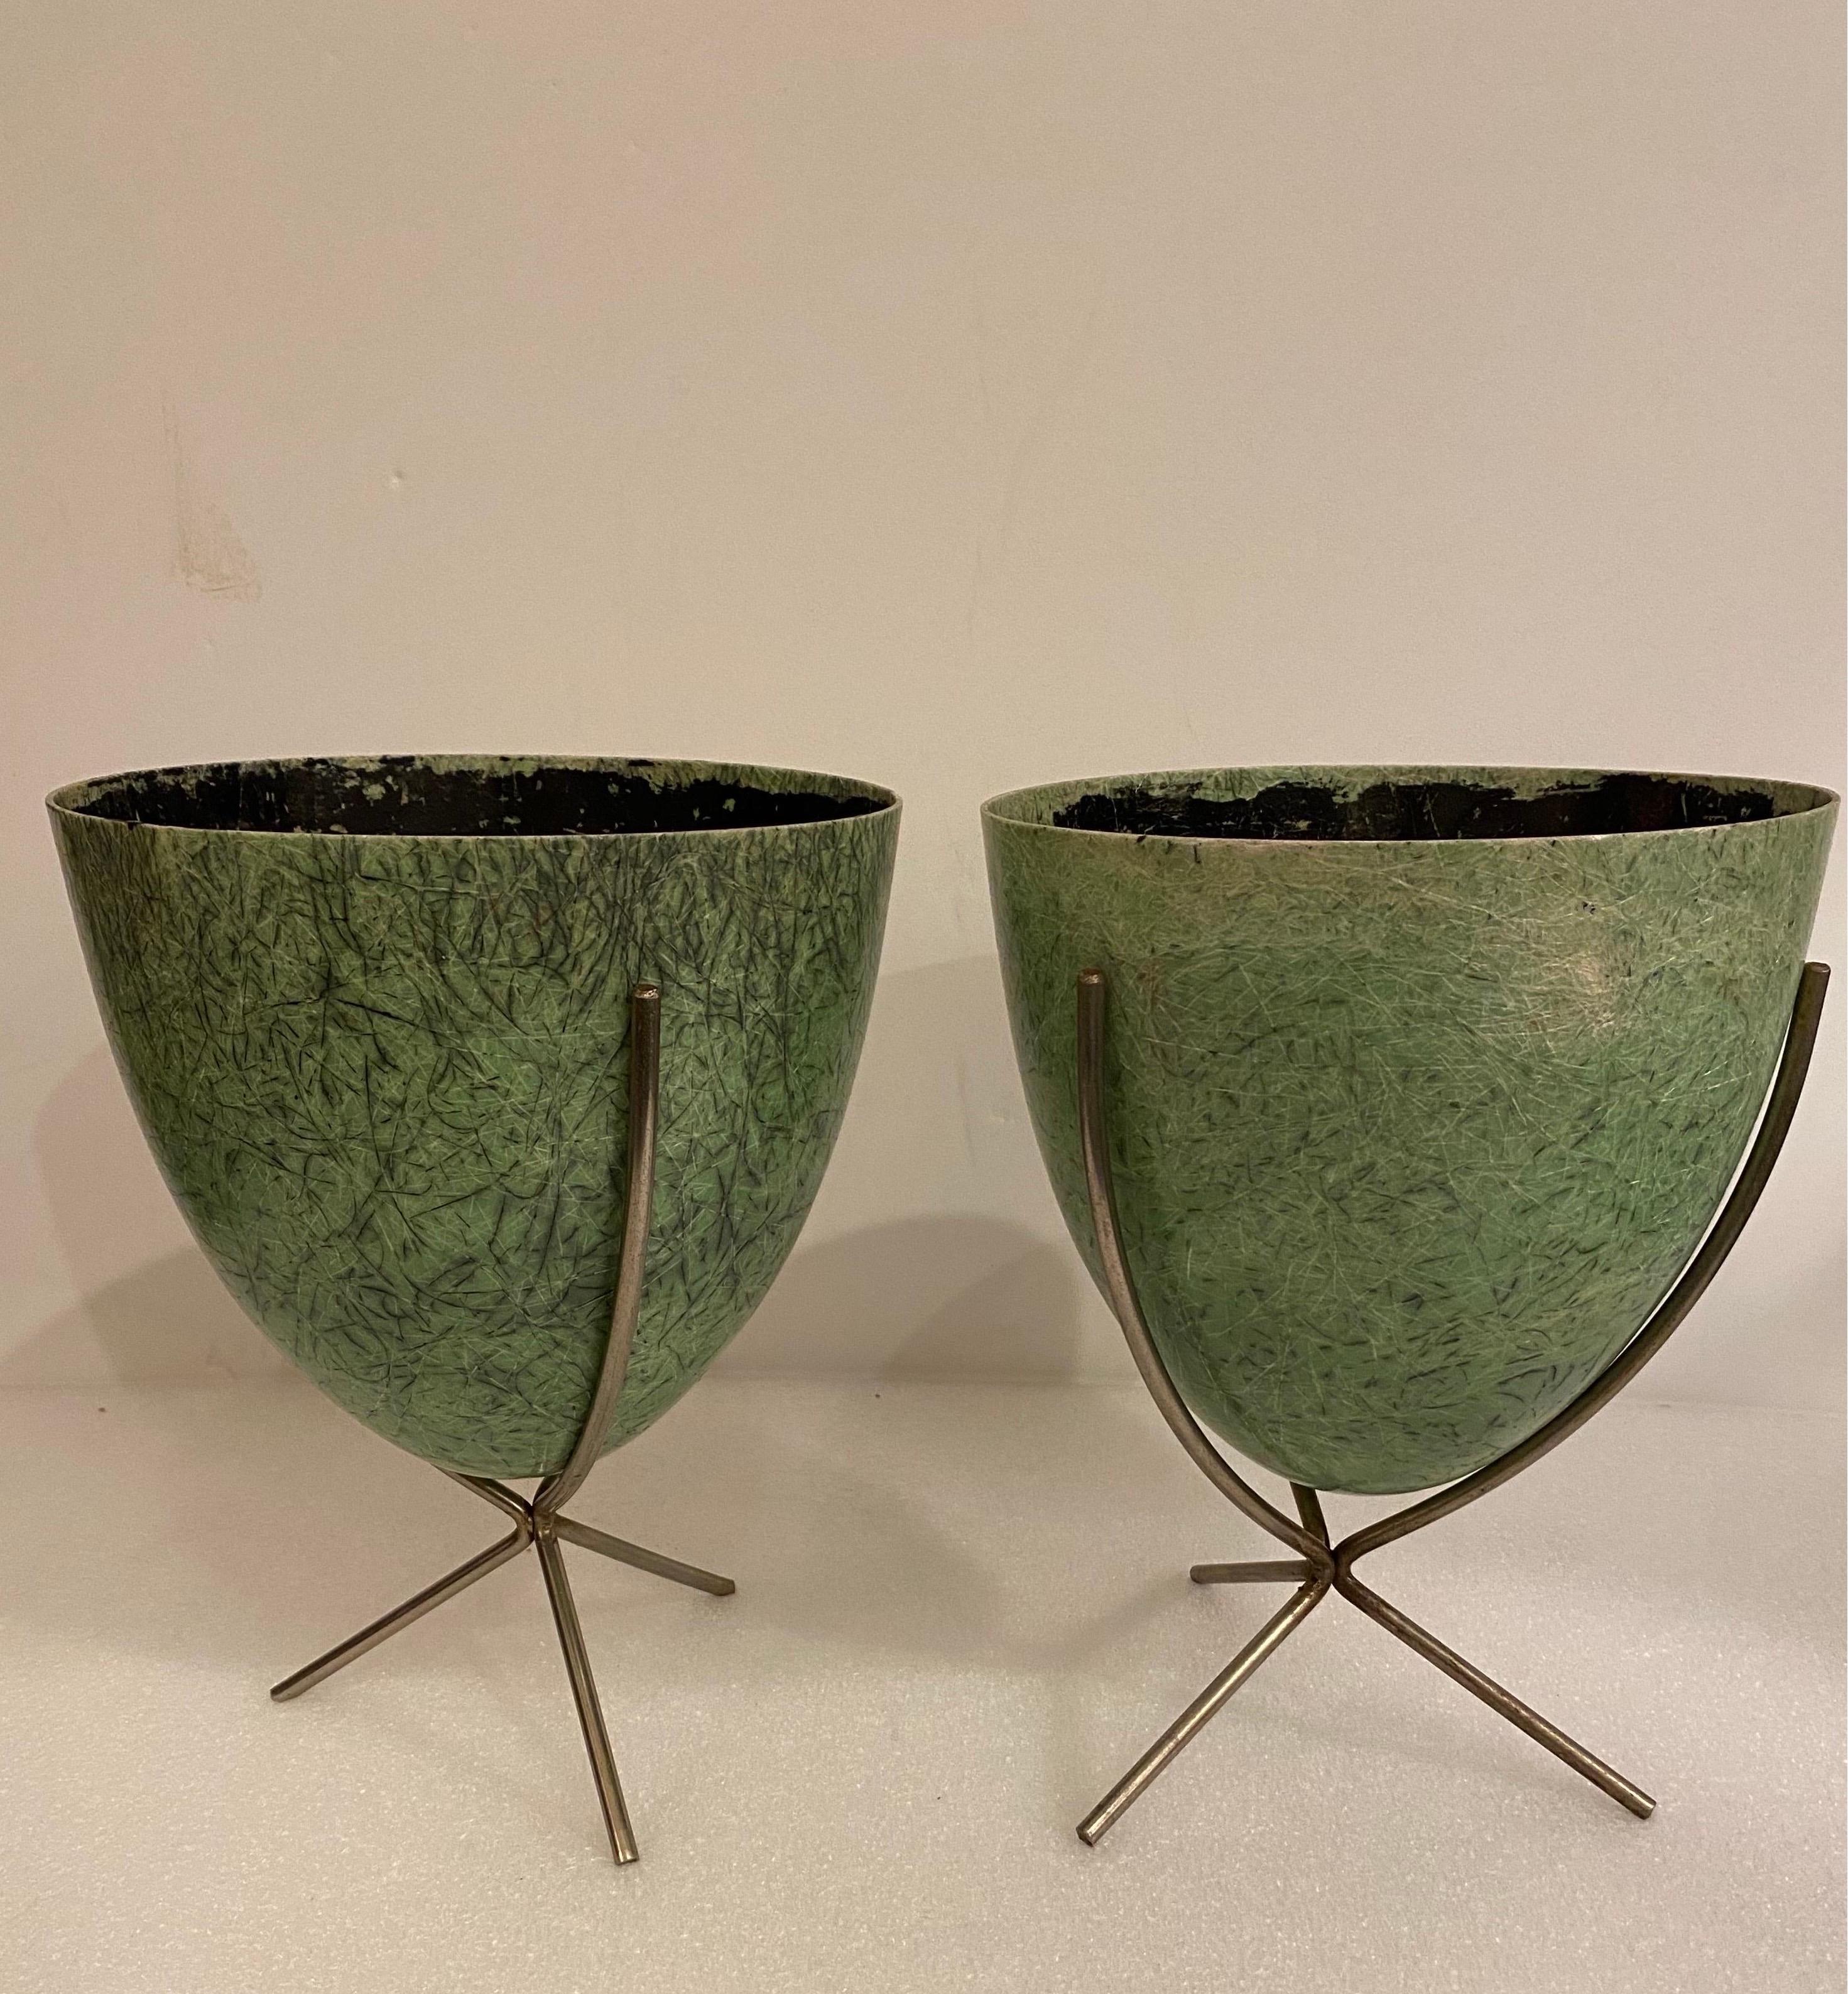 Mid-20th Century Fiberglass Bullet Planters, Kimball Manufacturing Co. For Sale